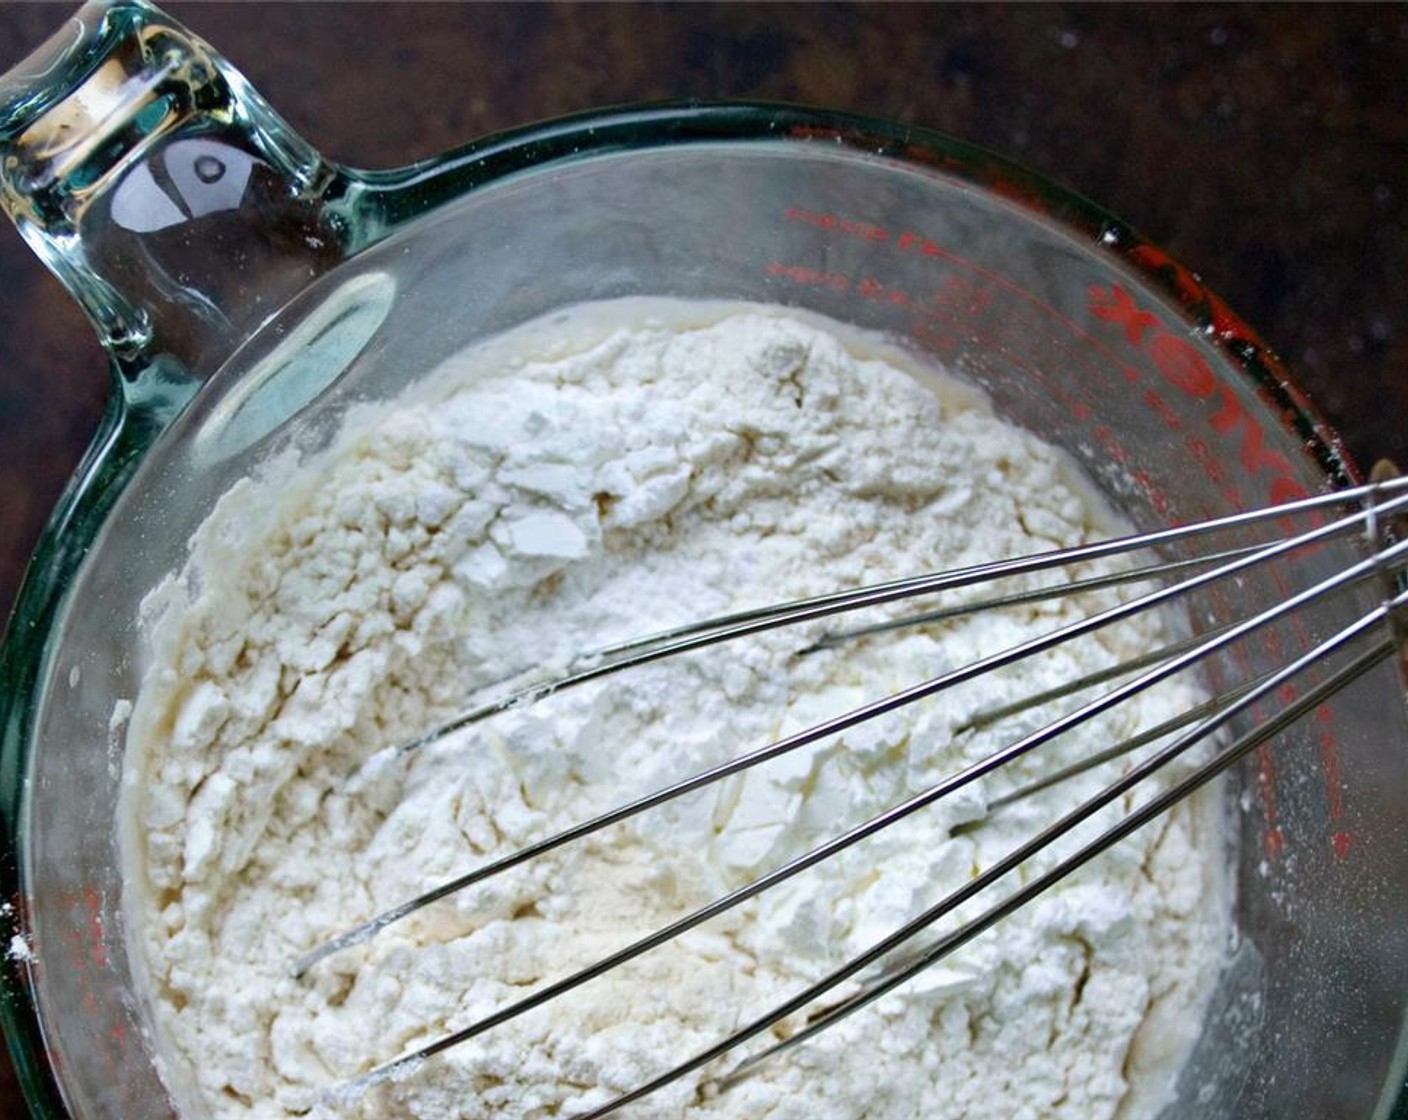 step 4 For pancakes, whisk All-Purpose Flour (1 cup), Baking Powder (1/2 Tbsp), and Salt (1/2 tsp) together in a large mixing bowl. Add Coconut Milk (1 cup), flaxseed egg, and Coconut Oil (1 Tbsp). Mix until just combined.